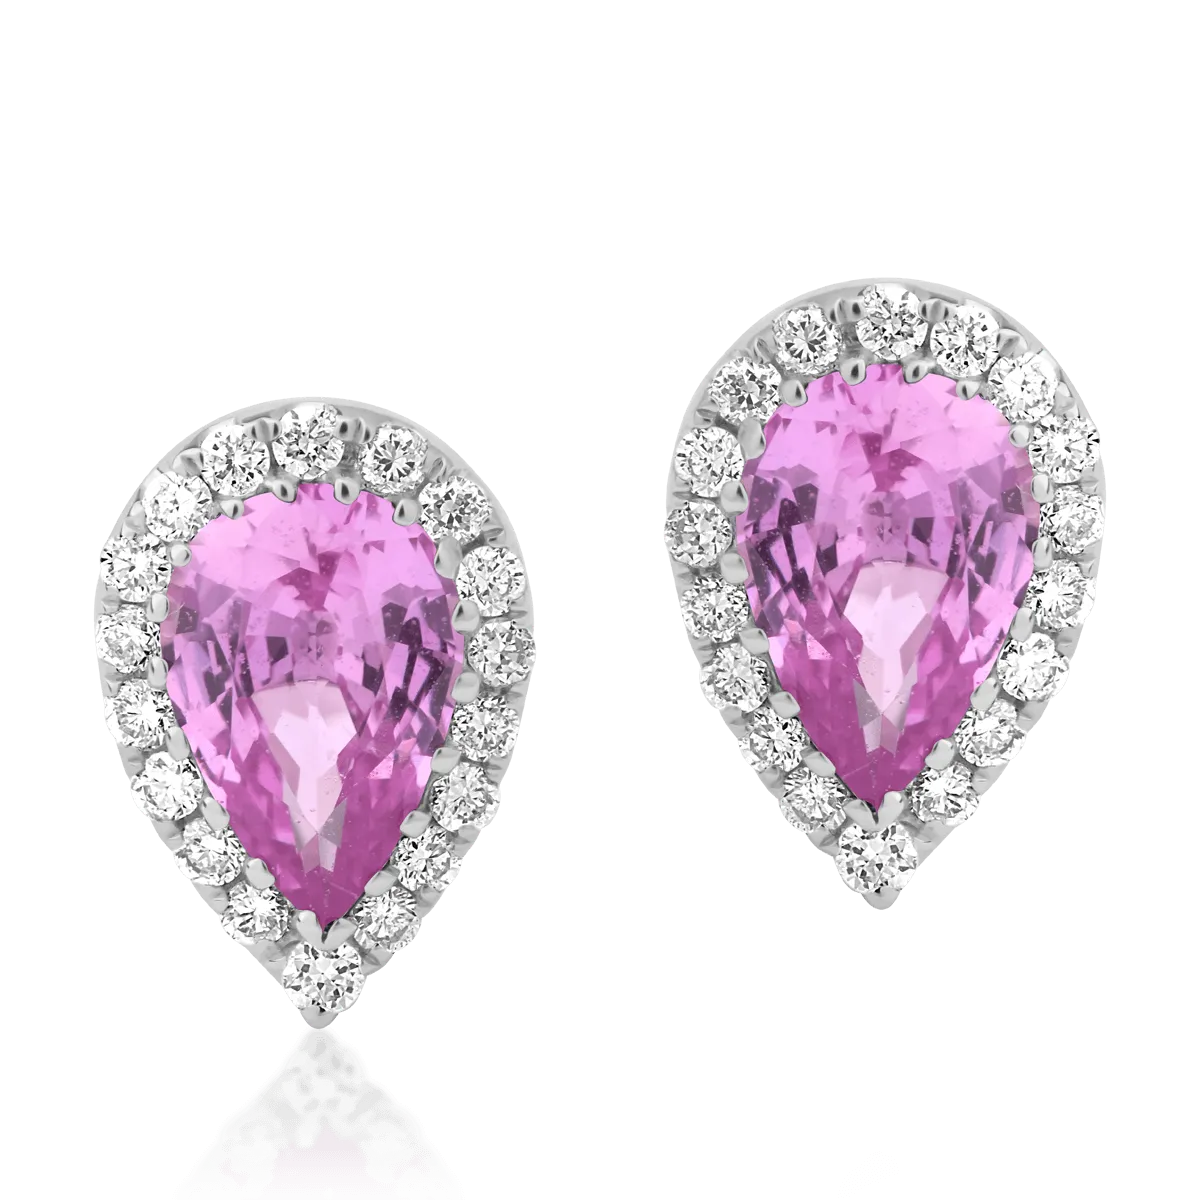 18K white gold earrings with 0.96ct pink sapphires and 0.13ct diamonds